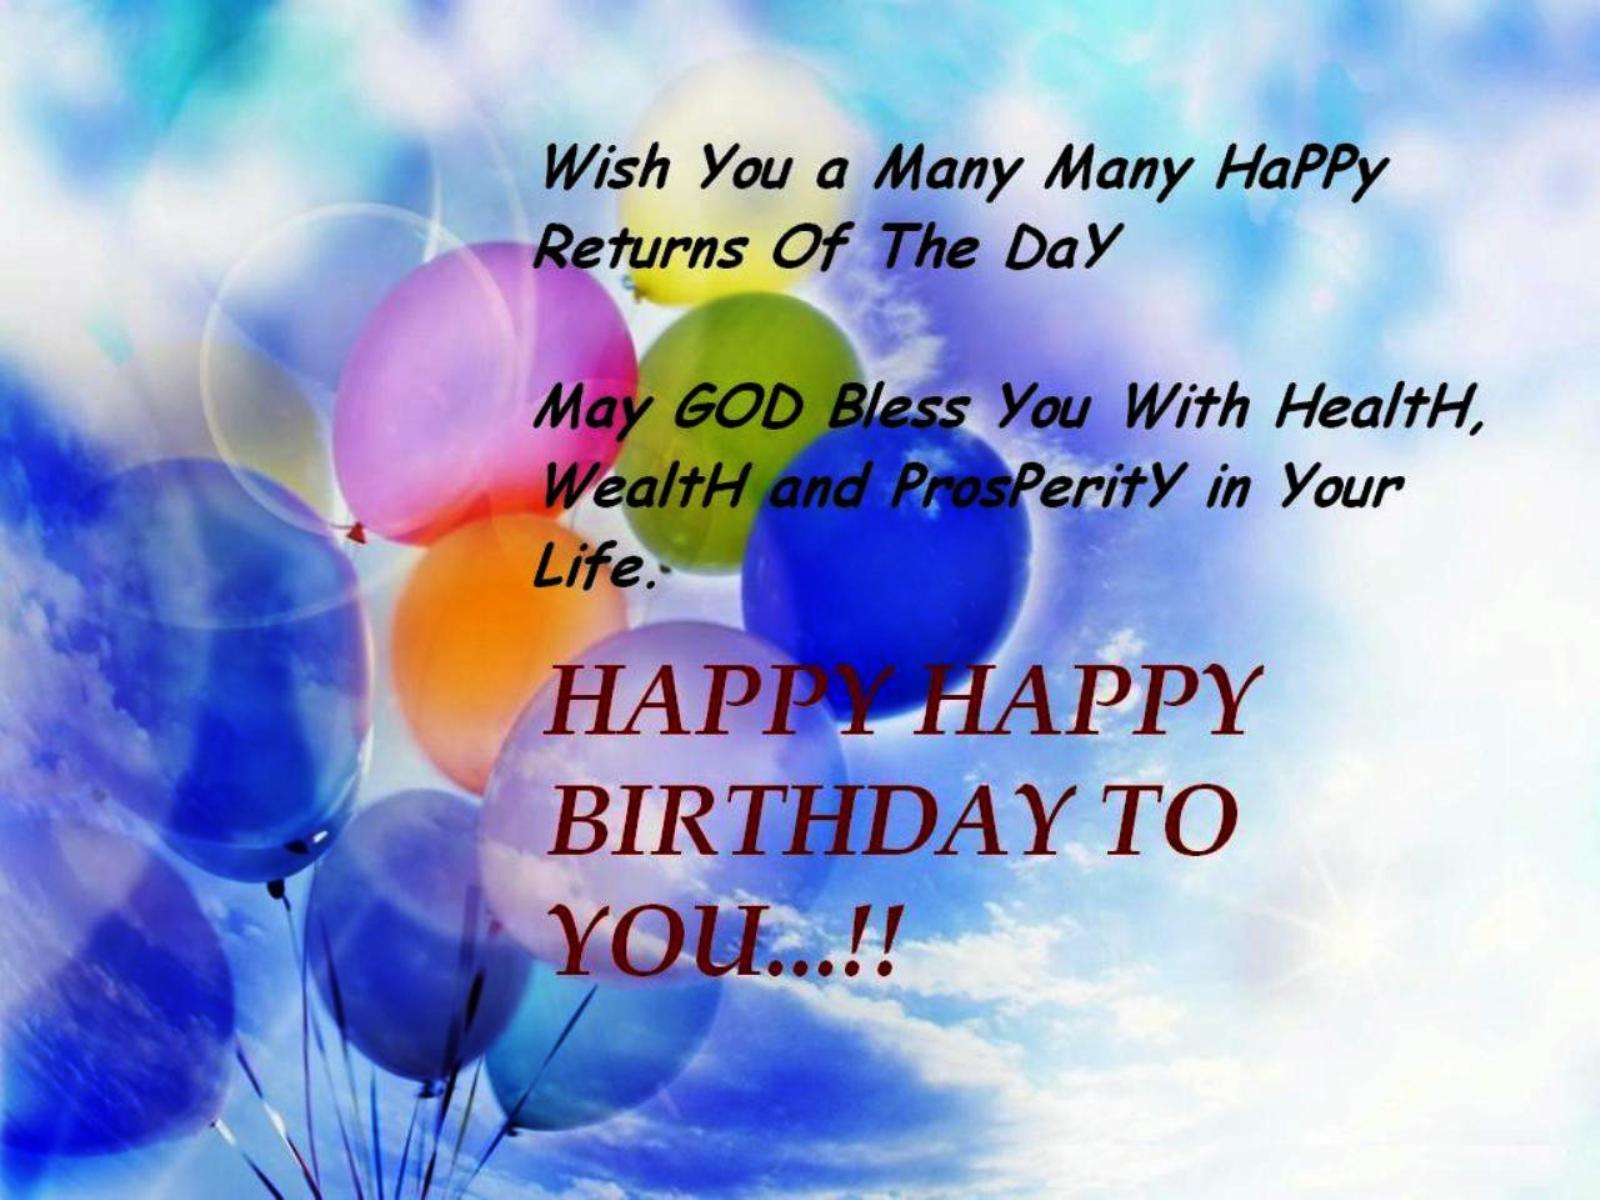 Happy Birthday Wishes Quotes - Birthday Wishes, Greetings